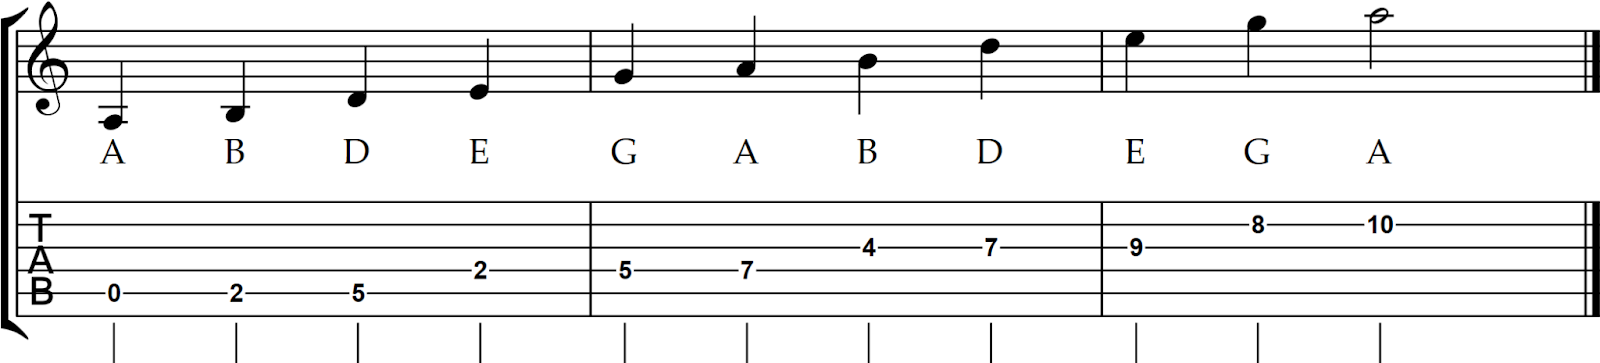 3 note per string pentatonic exercise on the A string. 